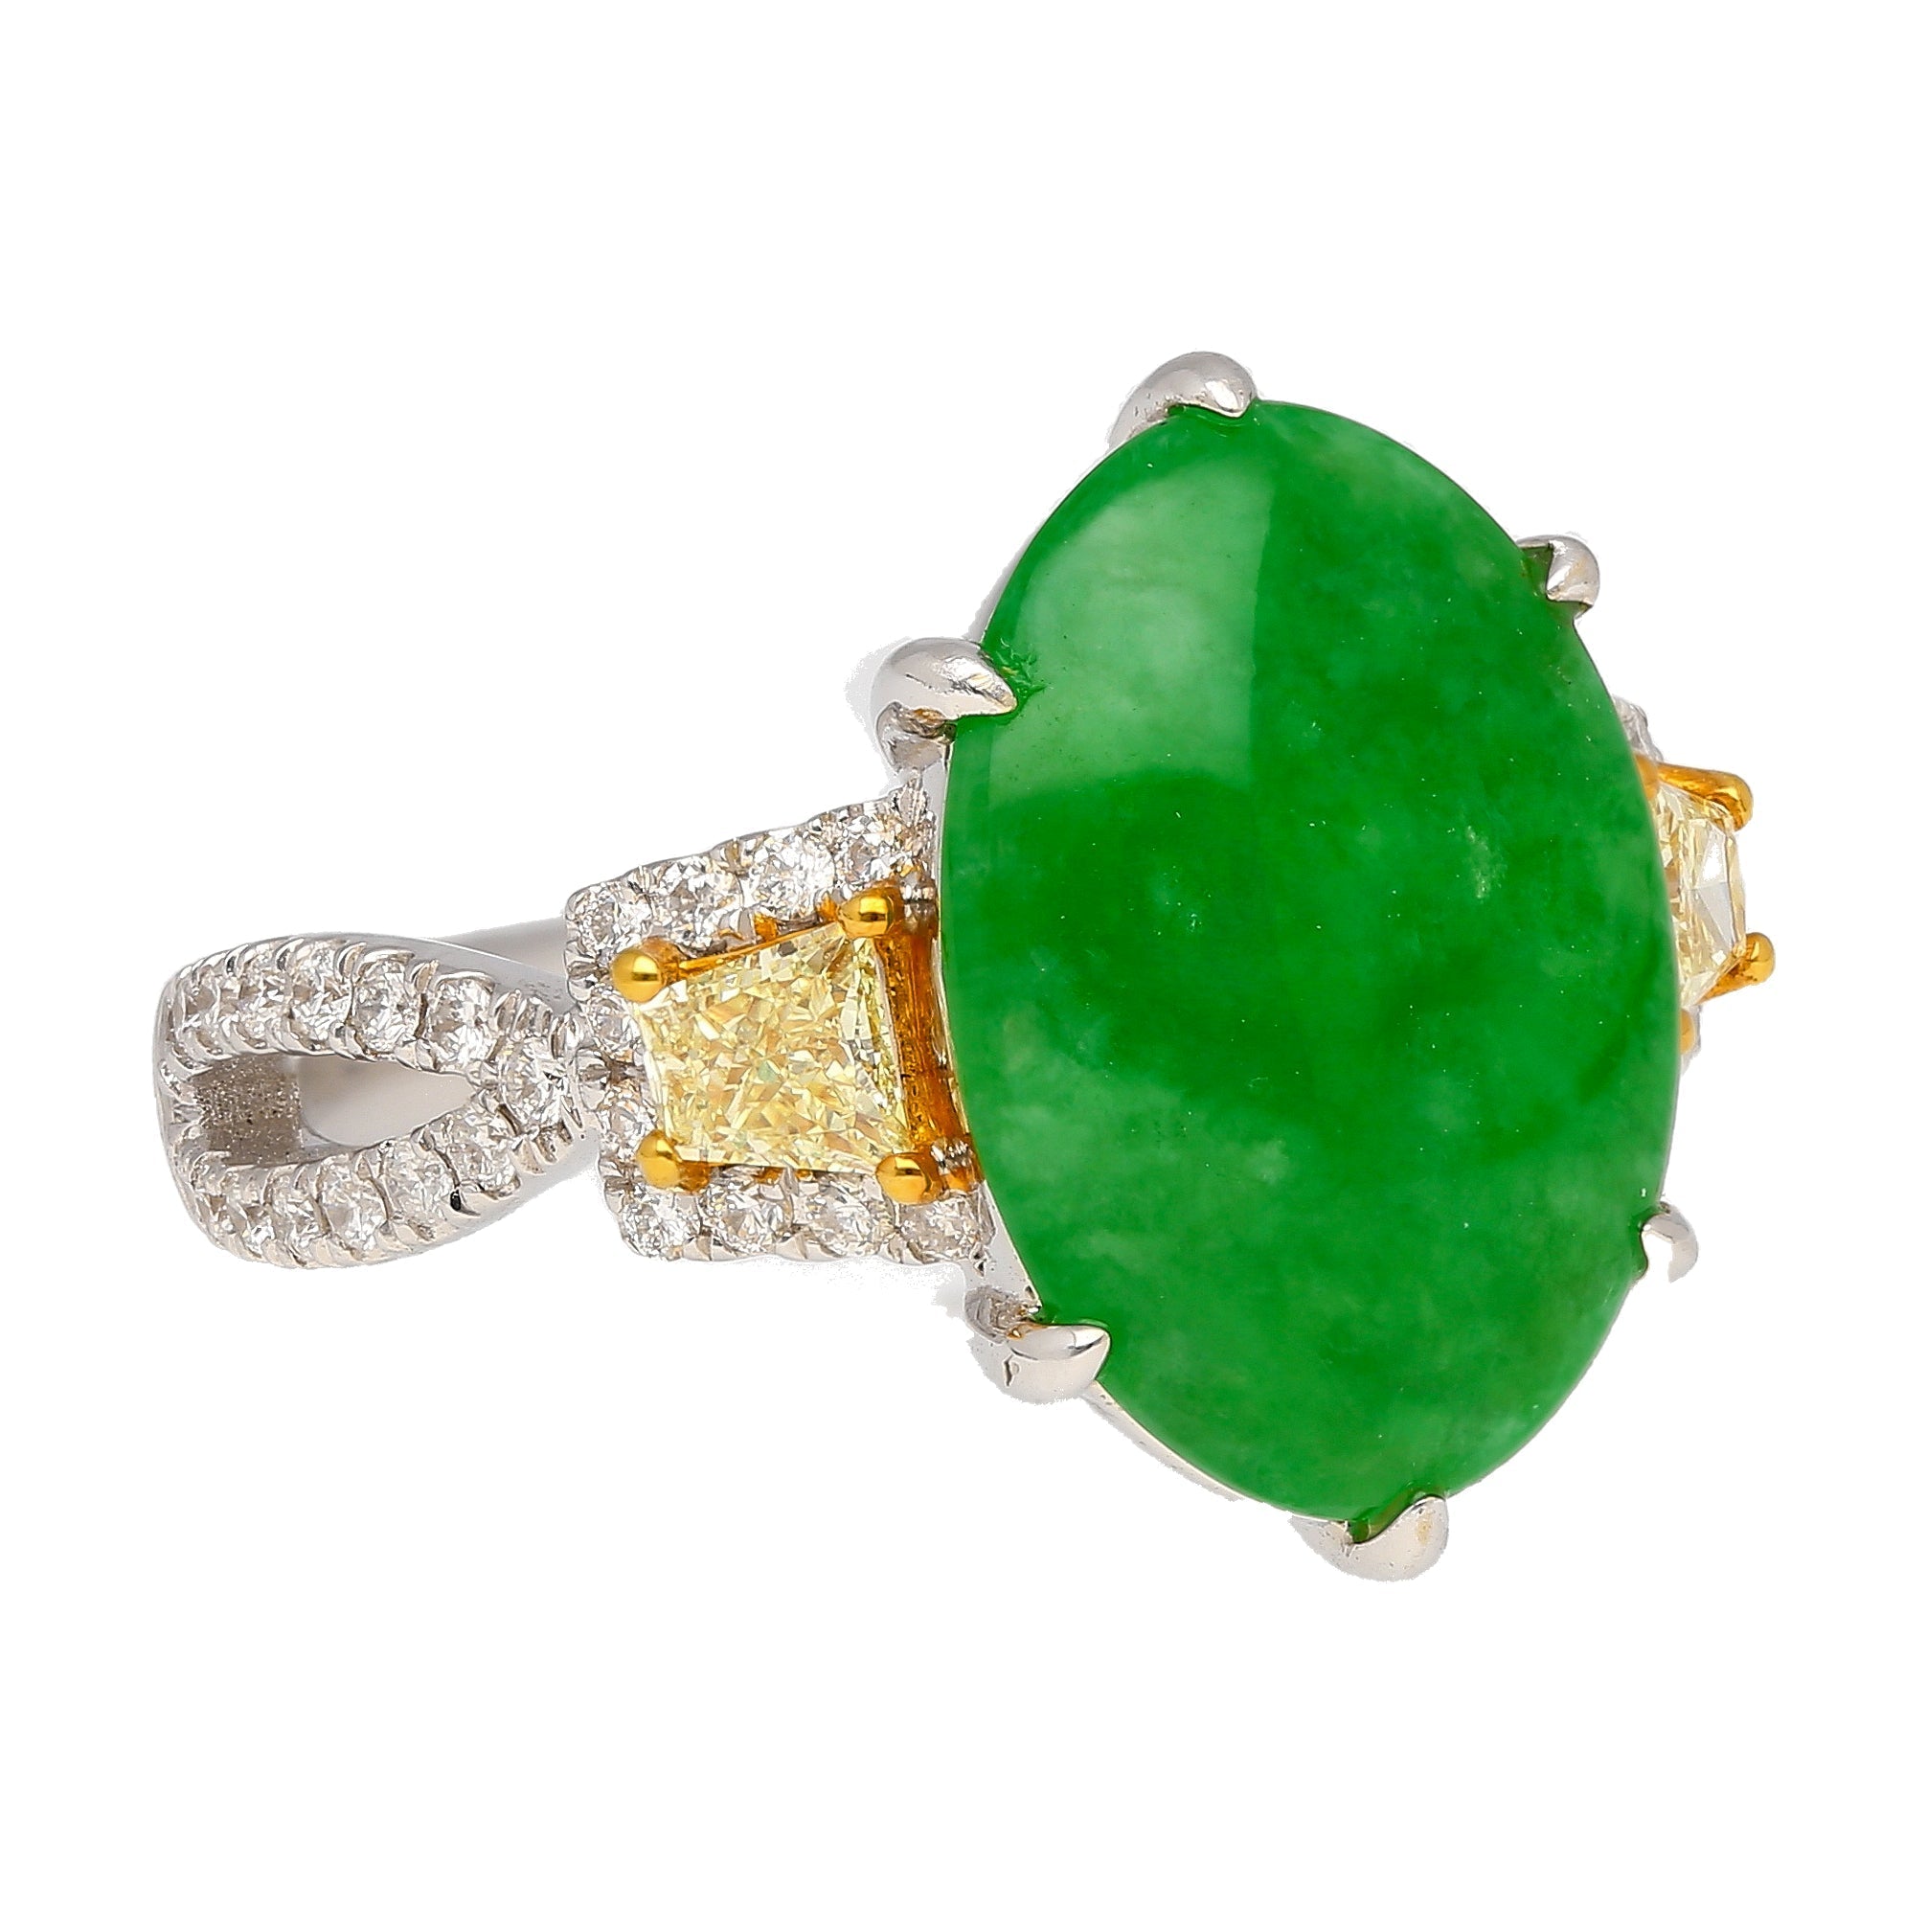 4.76 Carat Jadeite Jade with Trapezoid Cut Yellow Diamond Side Stone Ring in 18k White Gold